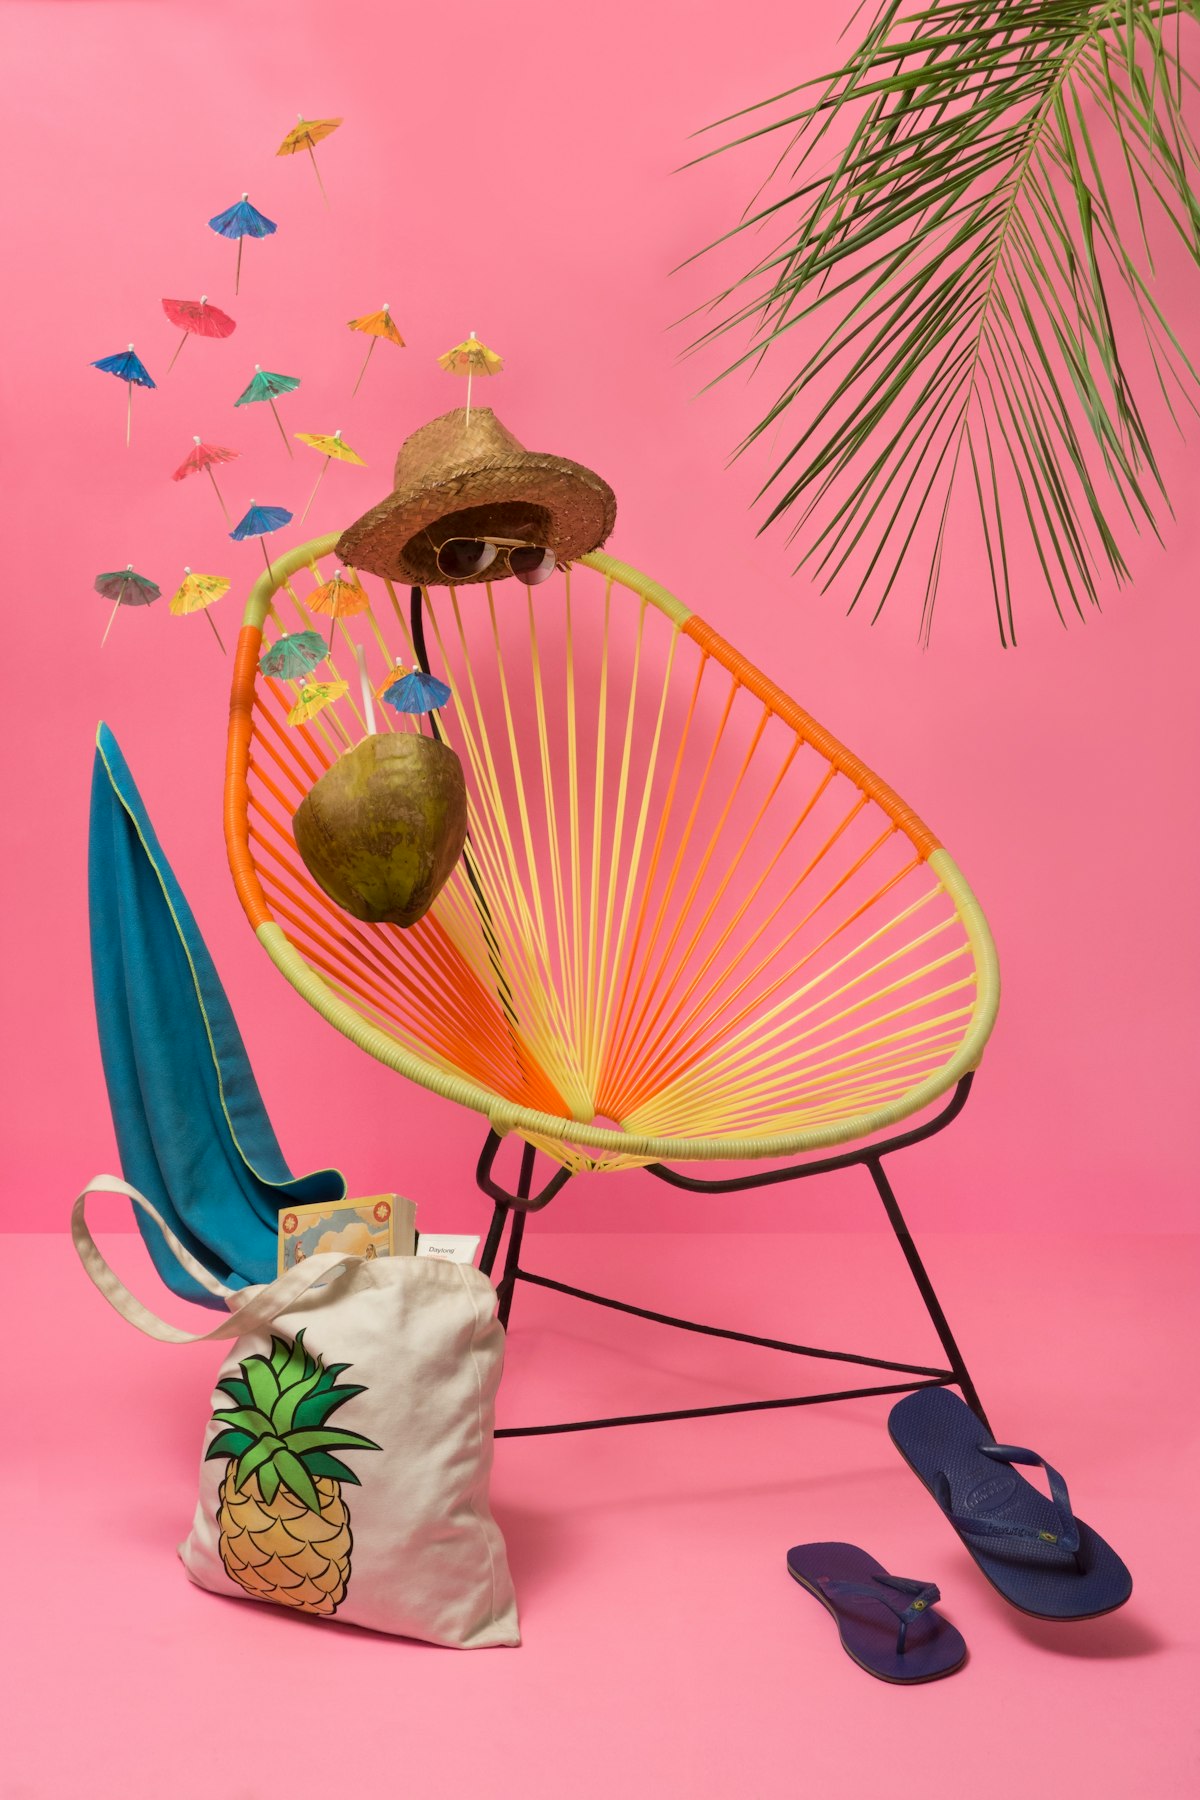 Acapulco chair: A classic of traditional Mexican design